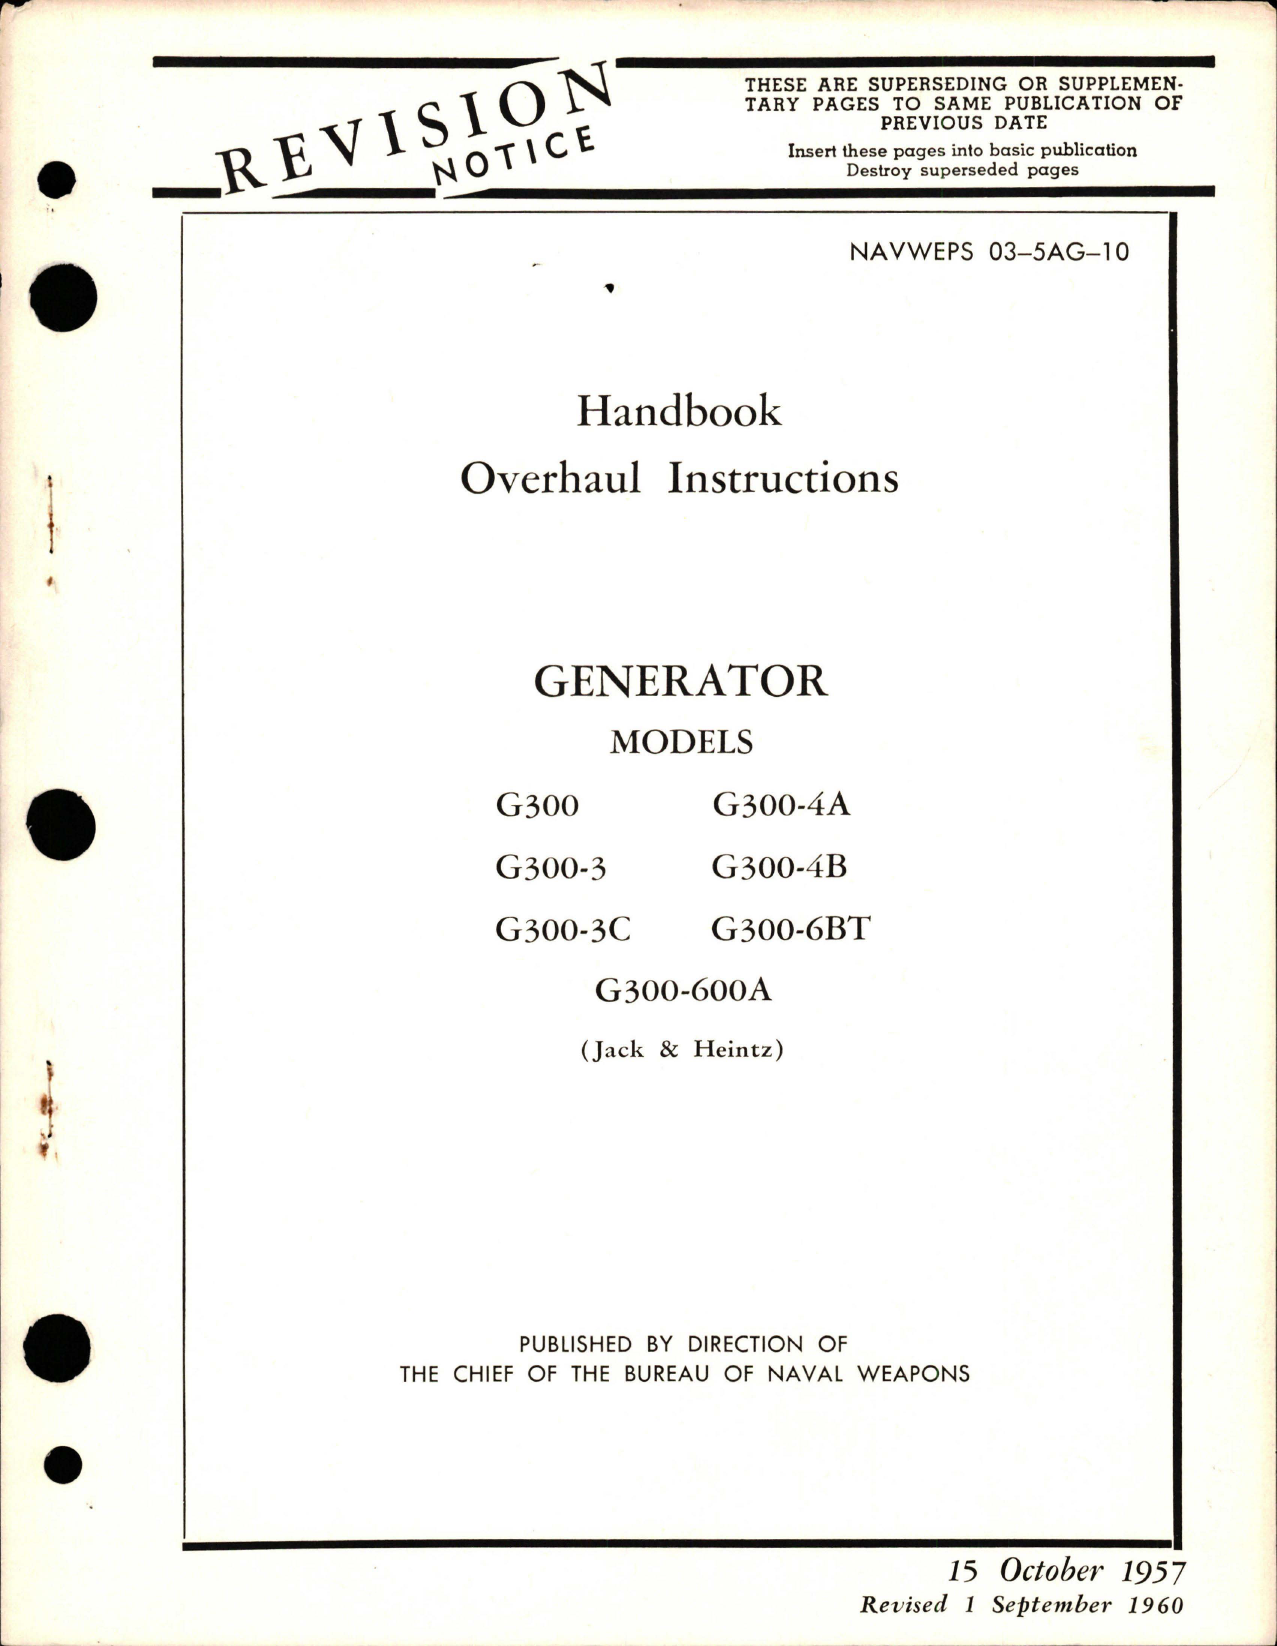 Sample page 1 from AirCorps Library document: Overhaul Instructions for Generator - Models G300, G300-3, G300-3C, G300-4A, G300-4B, G300-6BT, and G300-600A